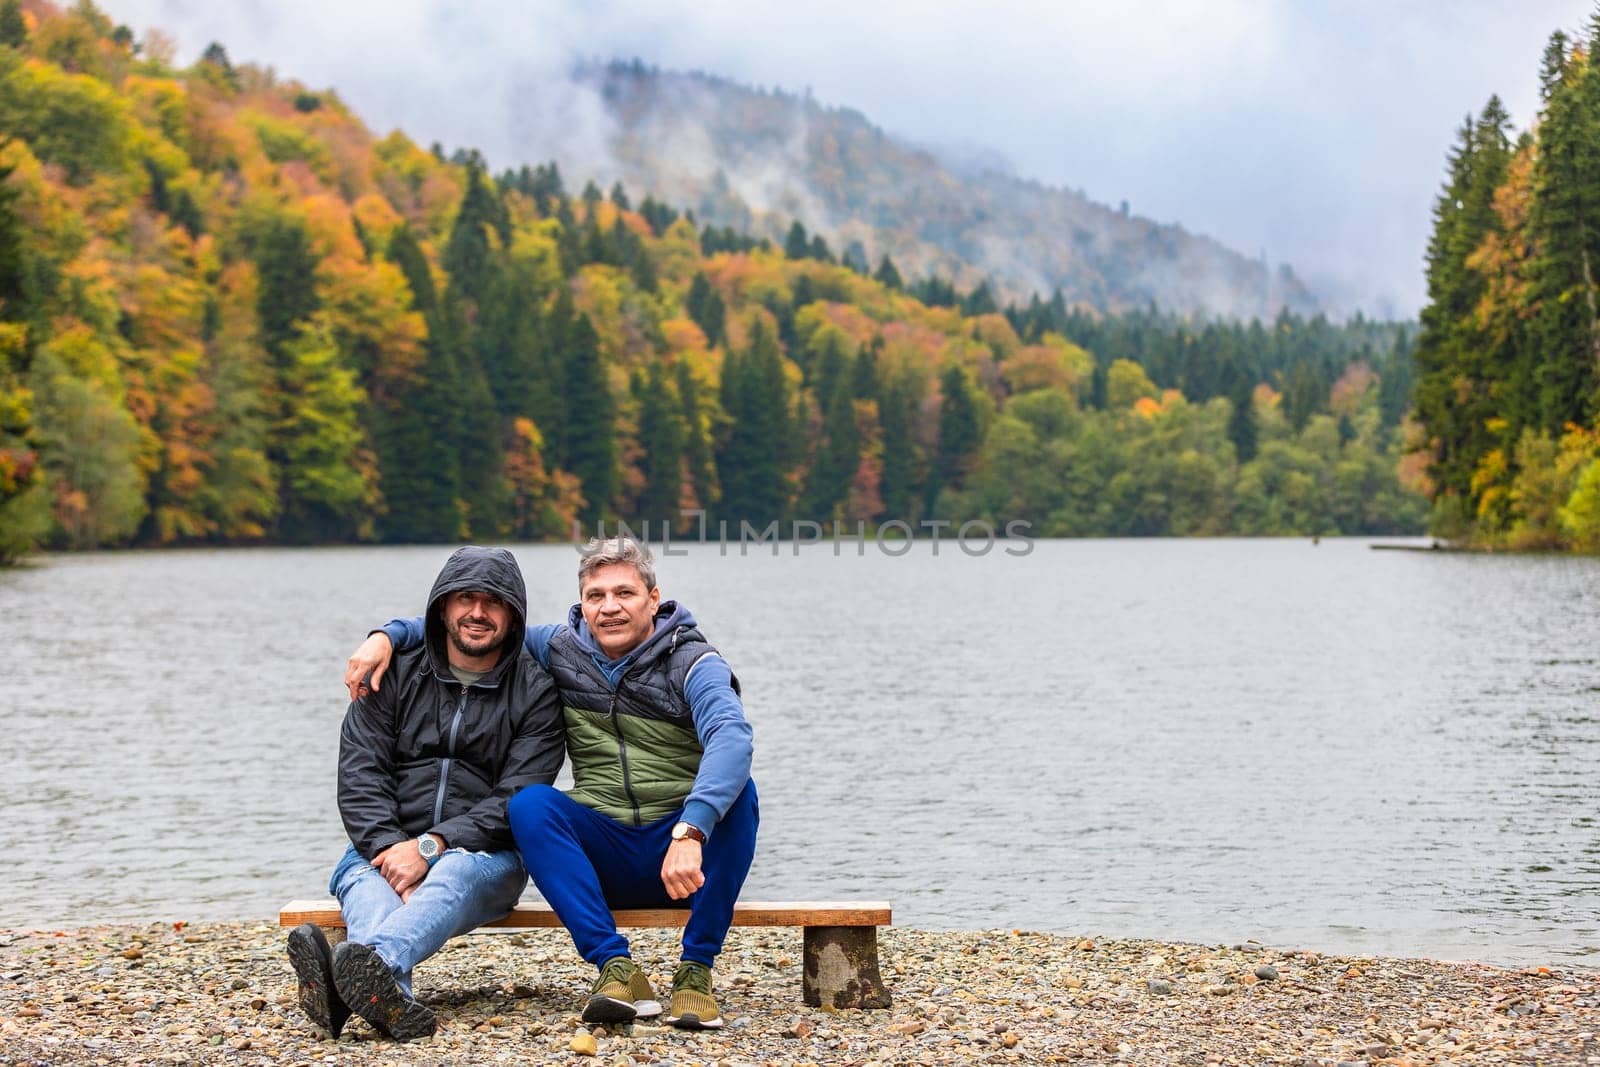 Two men enjoying the silence and the view of the autumn lake in the mountains by Yurich32